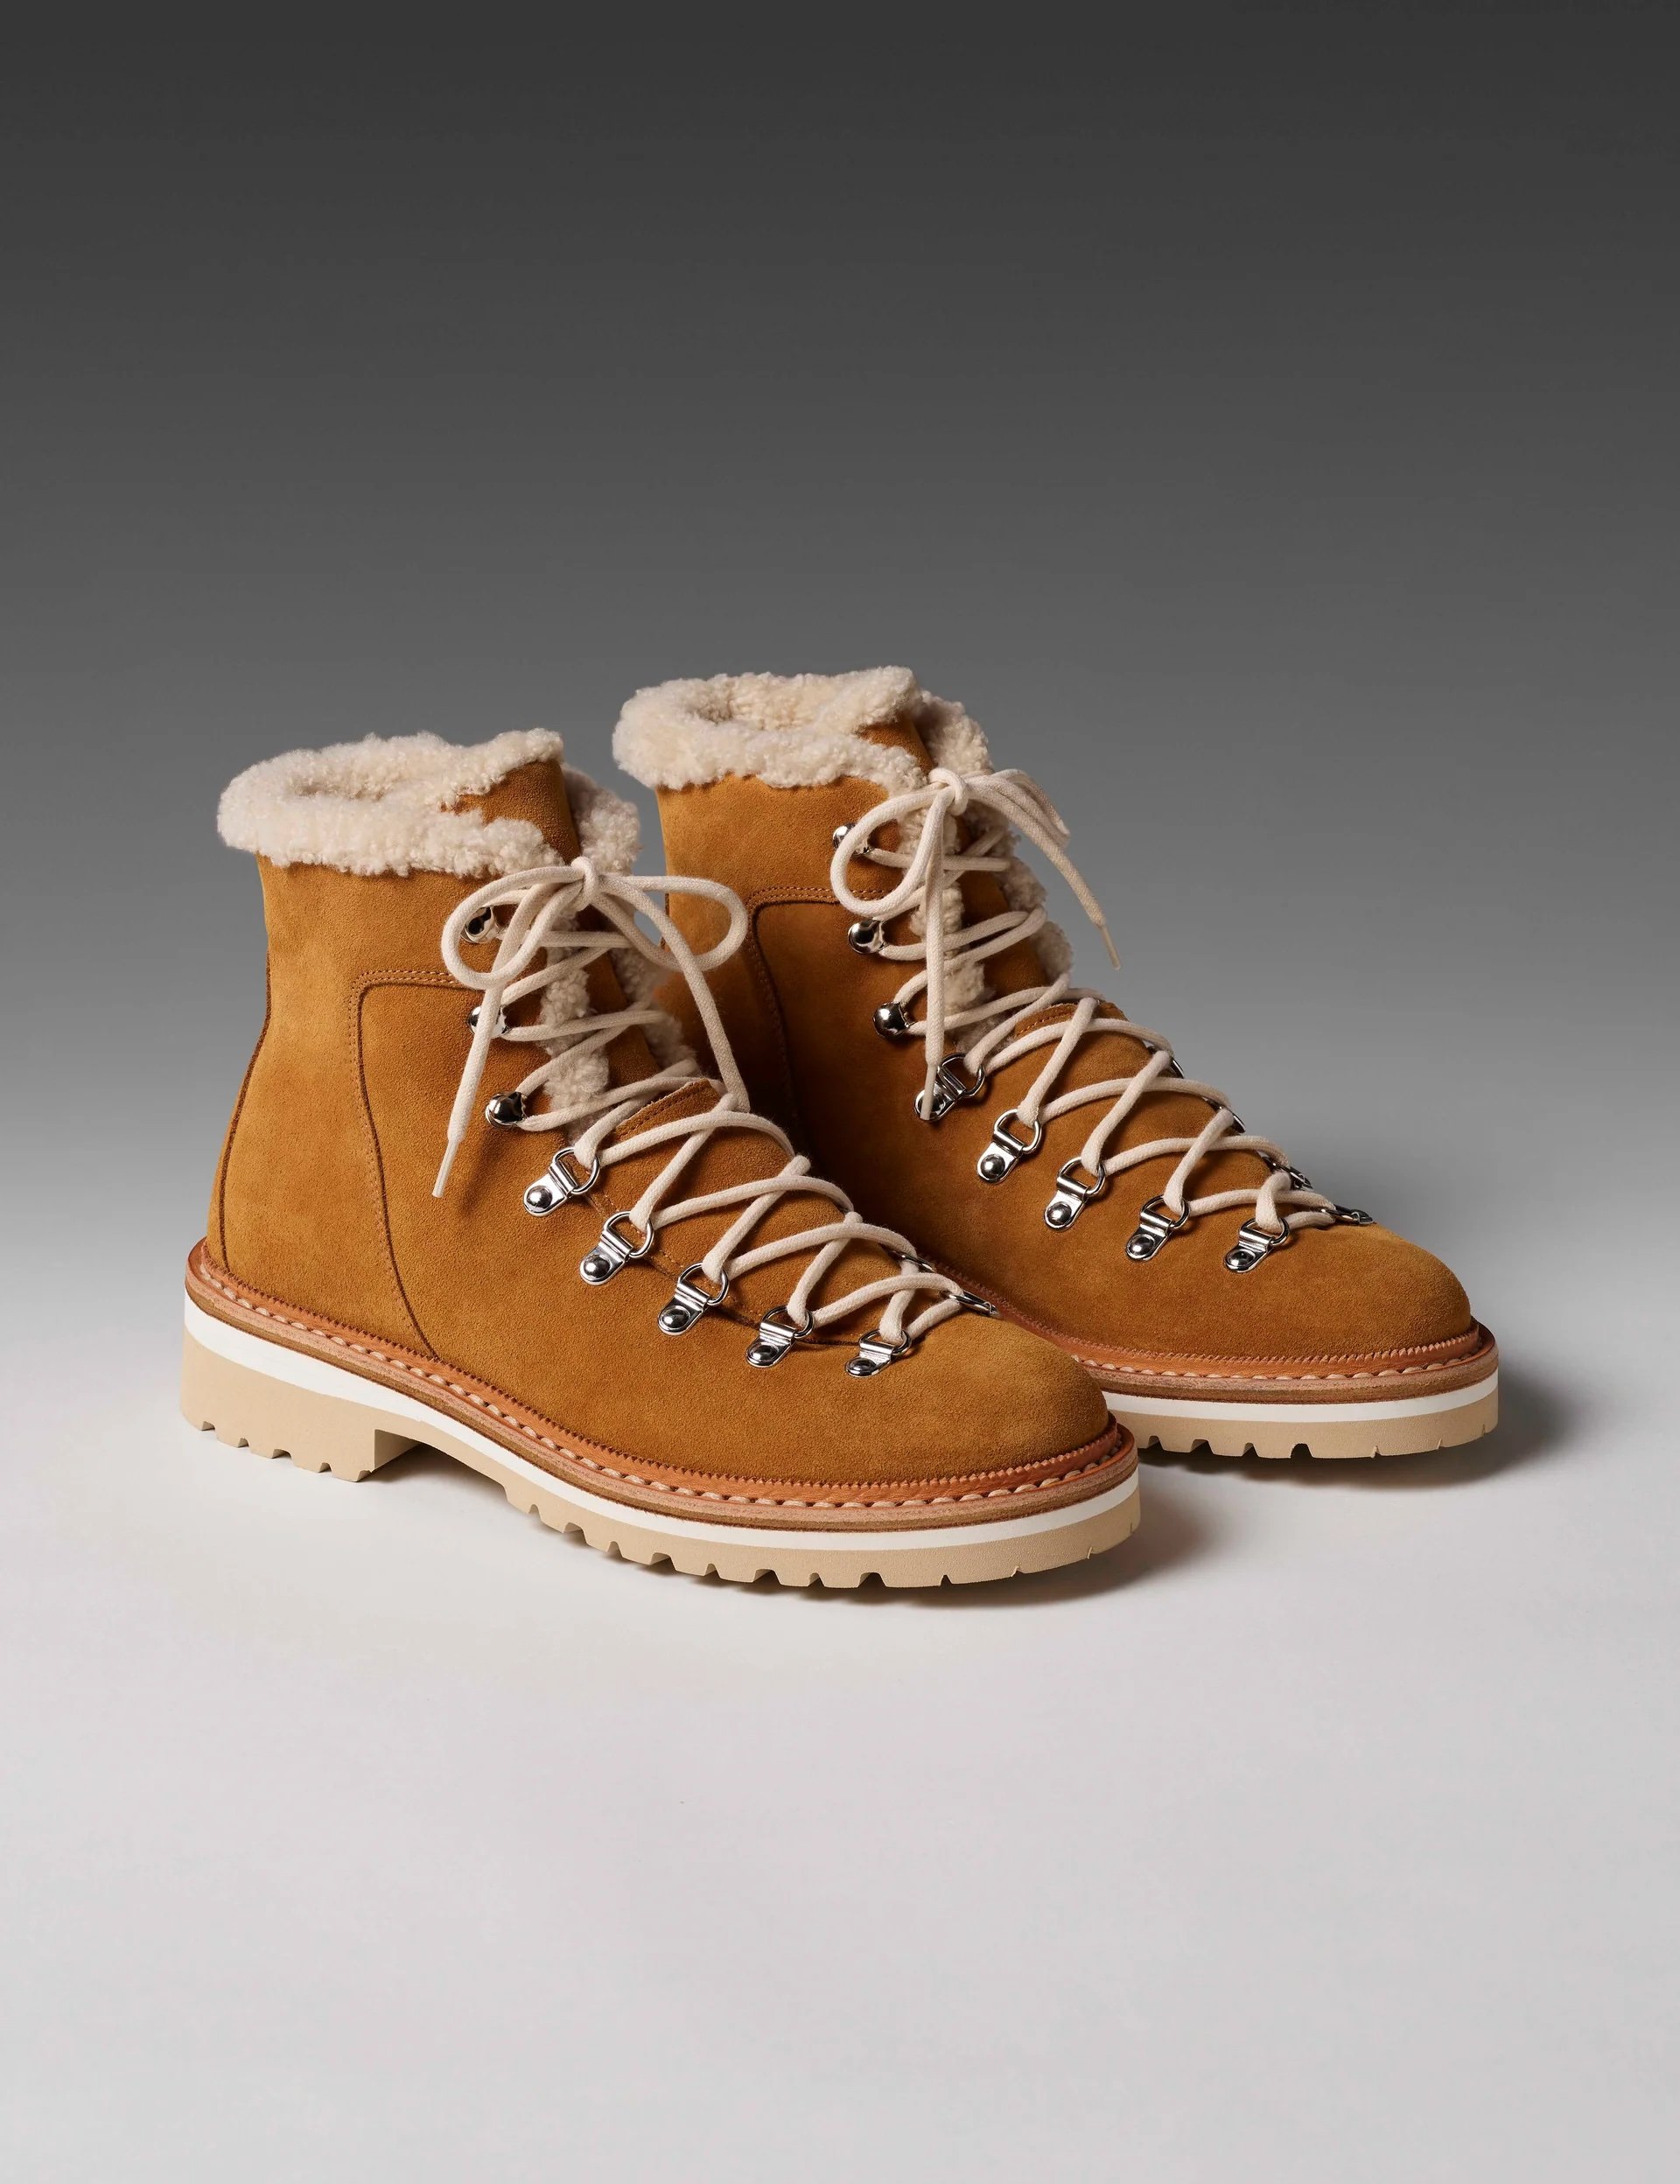 Hiking Boots with Shearling, $495